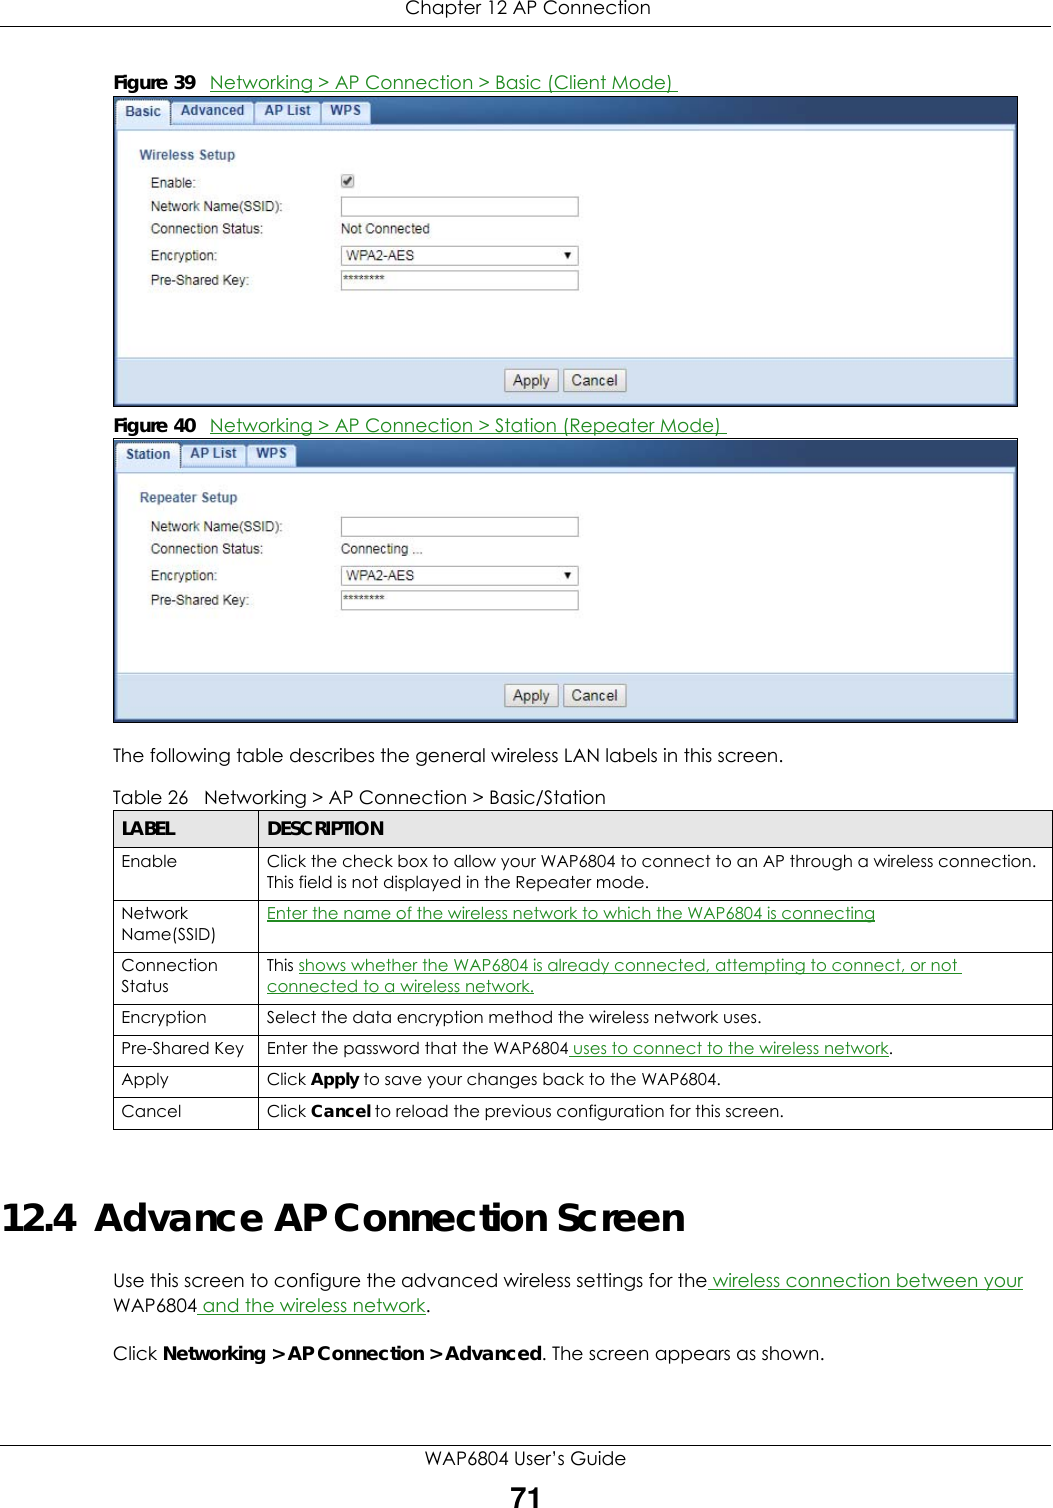  Chapter 12 AP ConnectionWAP6804 User’s Guide71Figure 39   Networking &gt; AP Connection &gt; Basic (Client Mode) Figure 40   Networking &gt; AP Connection &gt; Station (Repeater Mode) The following table describes the general wireless LAN labels in this screen.12.4  Advance AP Connection ScreenUse this screen to configure the advanced wireless settings for the wireless connection between your WAP6804 and the wireless network.Click Networking &gt; AP Connection &gt; Advanced. The screen appears as shown.Table 26   Networking &gt; AP Connection &gt; Basic/StationLABEL DESCRIPTIONEnable  Click the check box to allow your WAP6804 to connect to an AP through a wireless connection. This field is not displayed in the Repeater mode.Network Name(SSID)Enter the name of the wireless network to which the WAP6804 is connectingConnection StatusThis shows whether the WAP6804 is already connected, attempting to connect, or not connected to a wireless network.Encryption Select the data encryption method the wireless network uses.Pre-Shared Key Enter the password that the WAP6804 uses to connect to the wireless network. Apply Click Apply to save your changes back to the WAP6804.Cancel Click Cancel to reload the previous configuration for this screen.